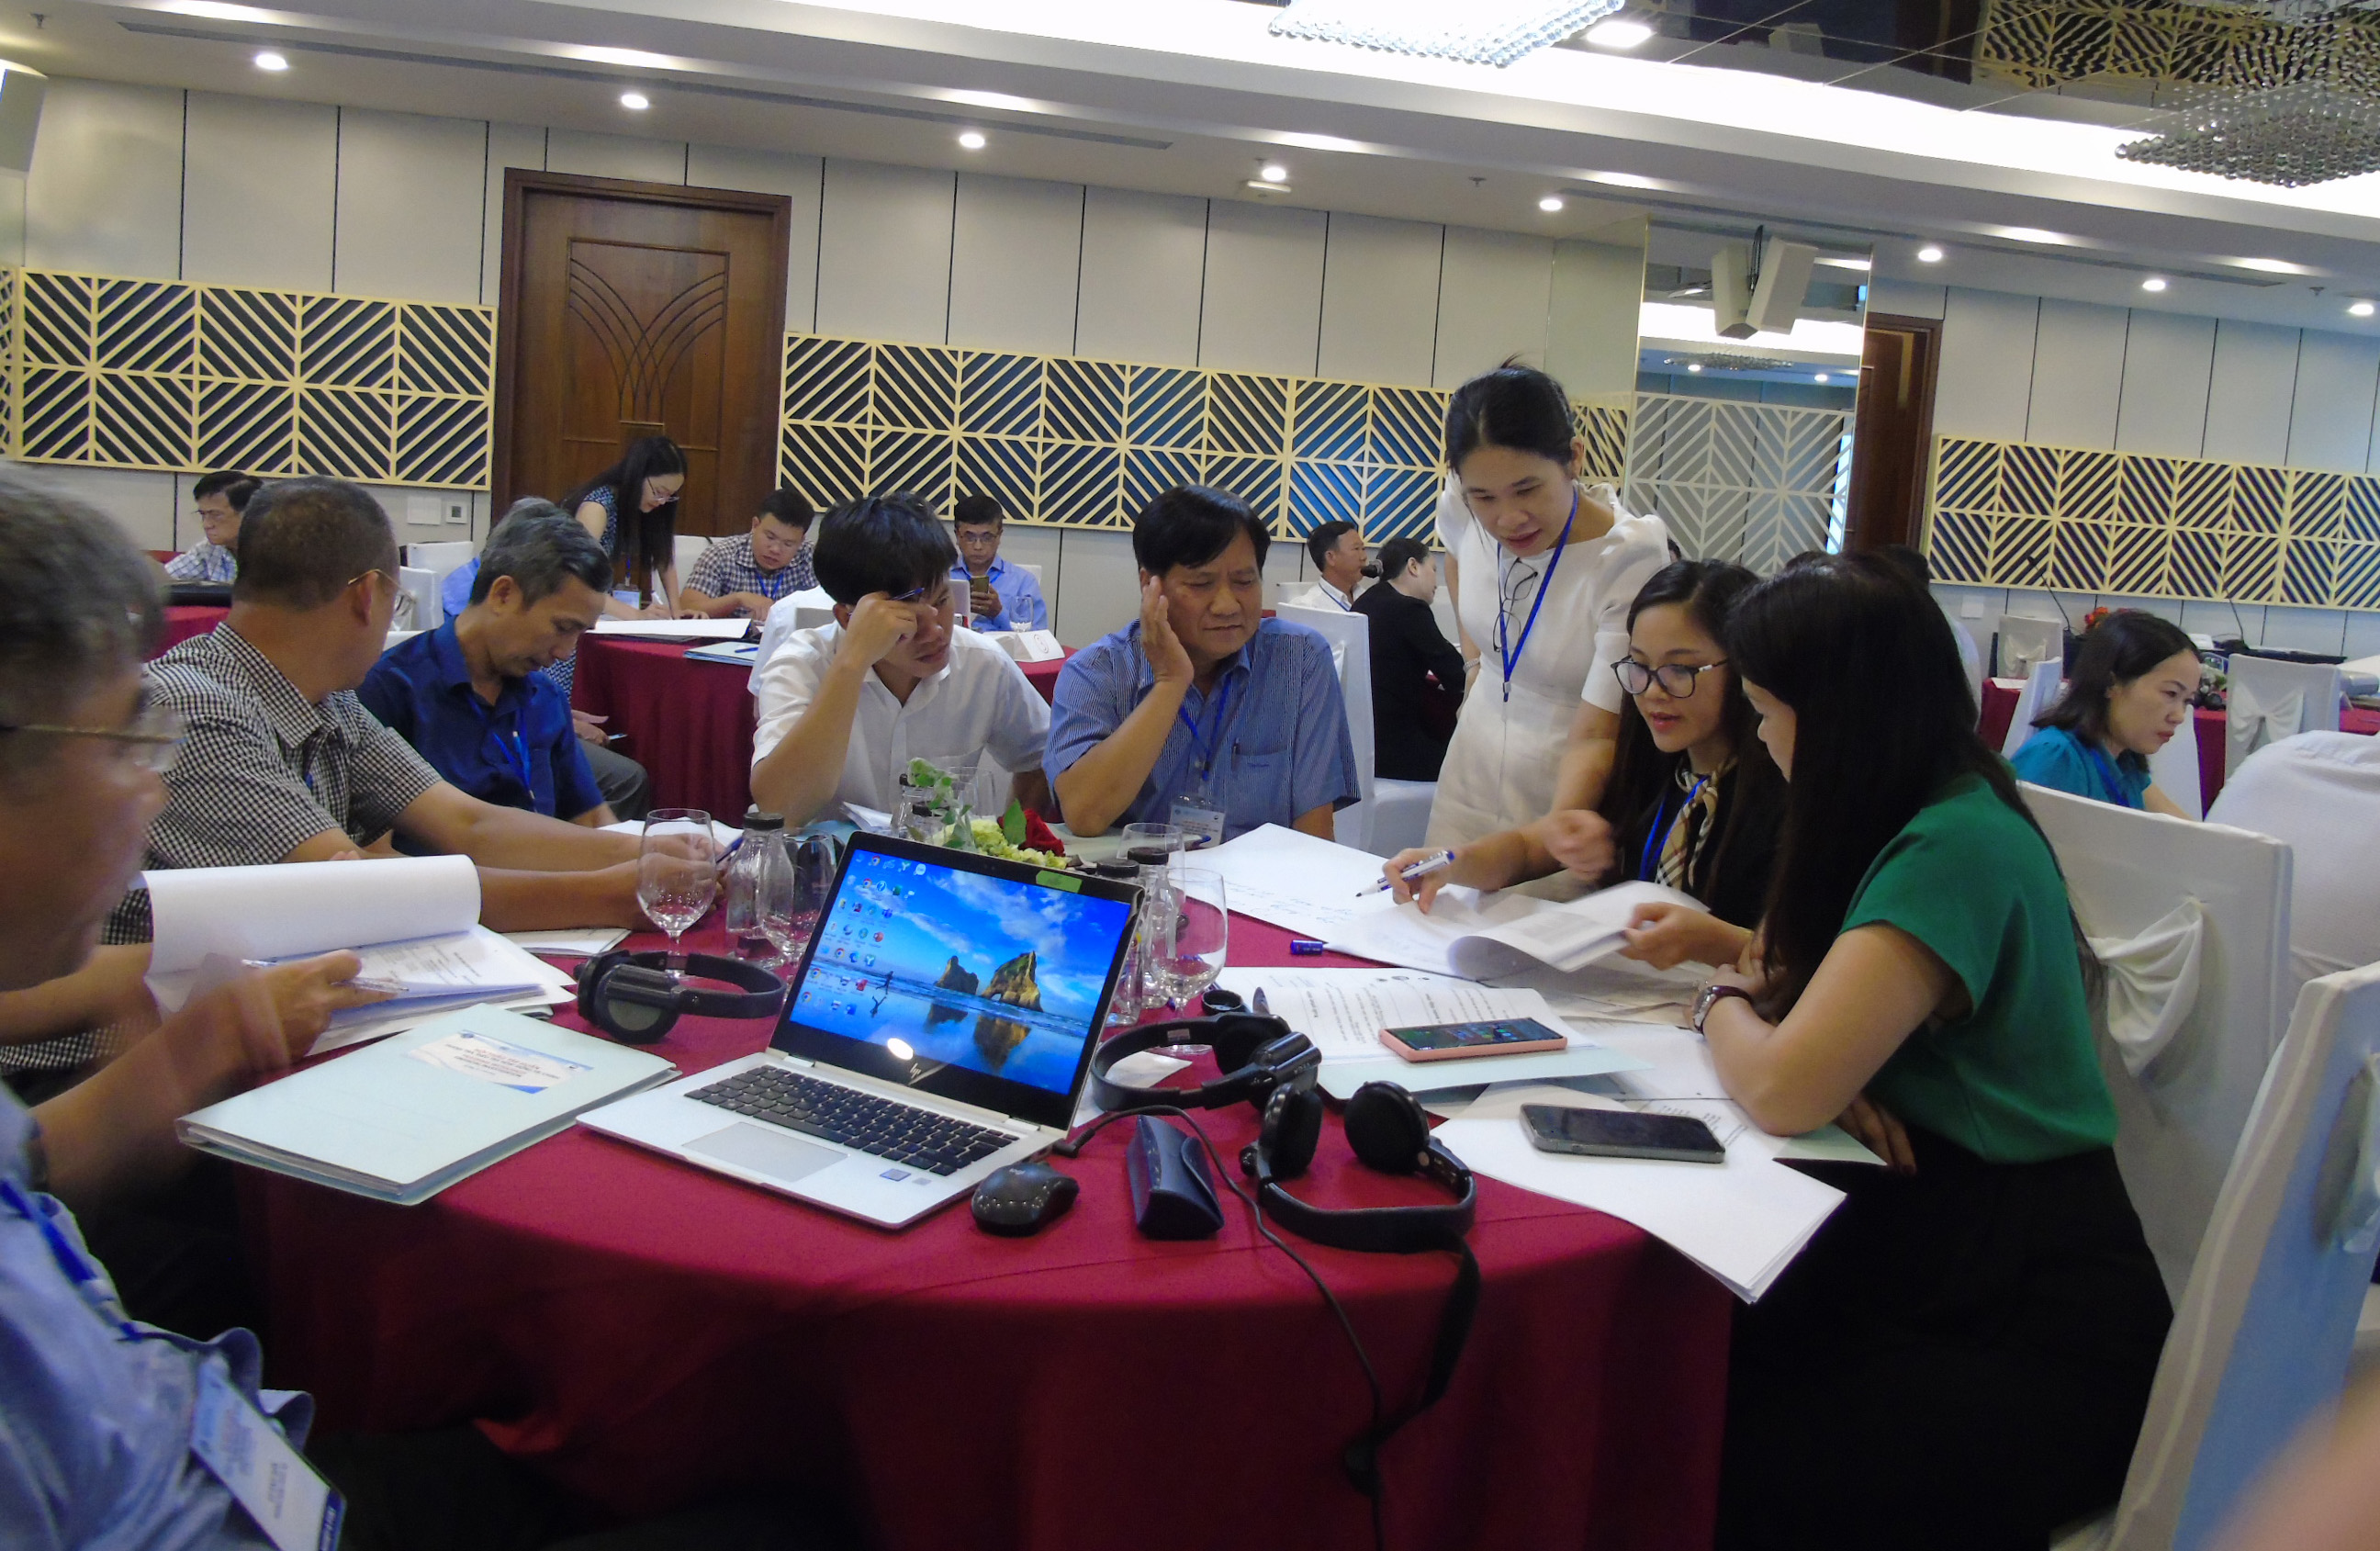 Ms. Nguyen Nguyet Minh, Officer in Charge, UNODC Viet Nam Country Office, discusses investigation plans with participants